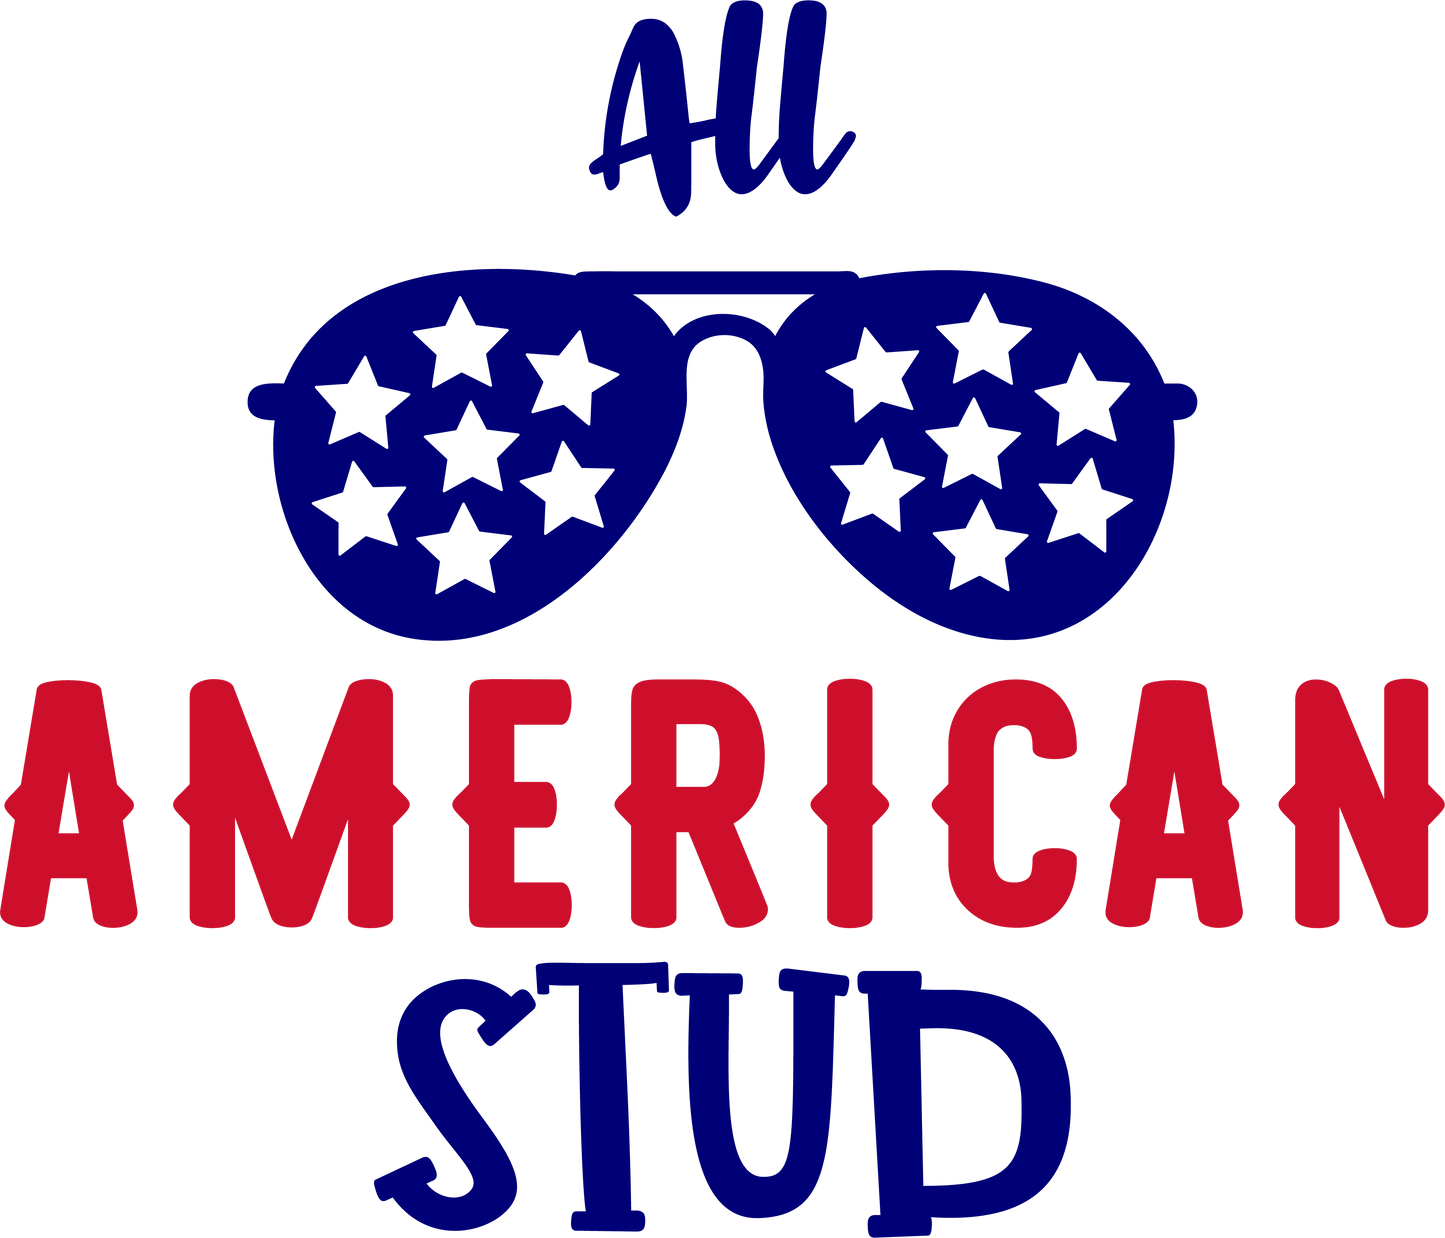 All American Stud 4th of July Crew neck T-Shirt Style